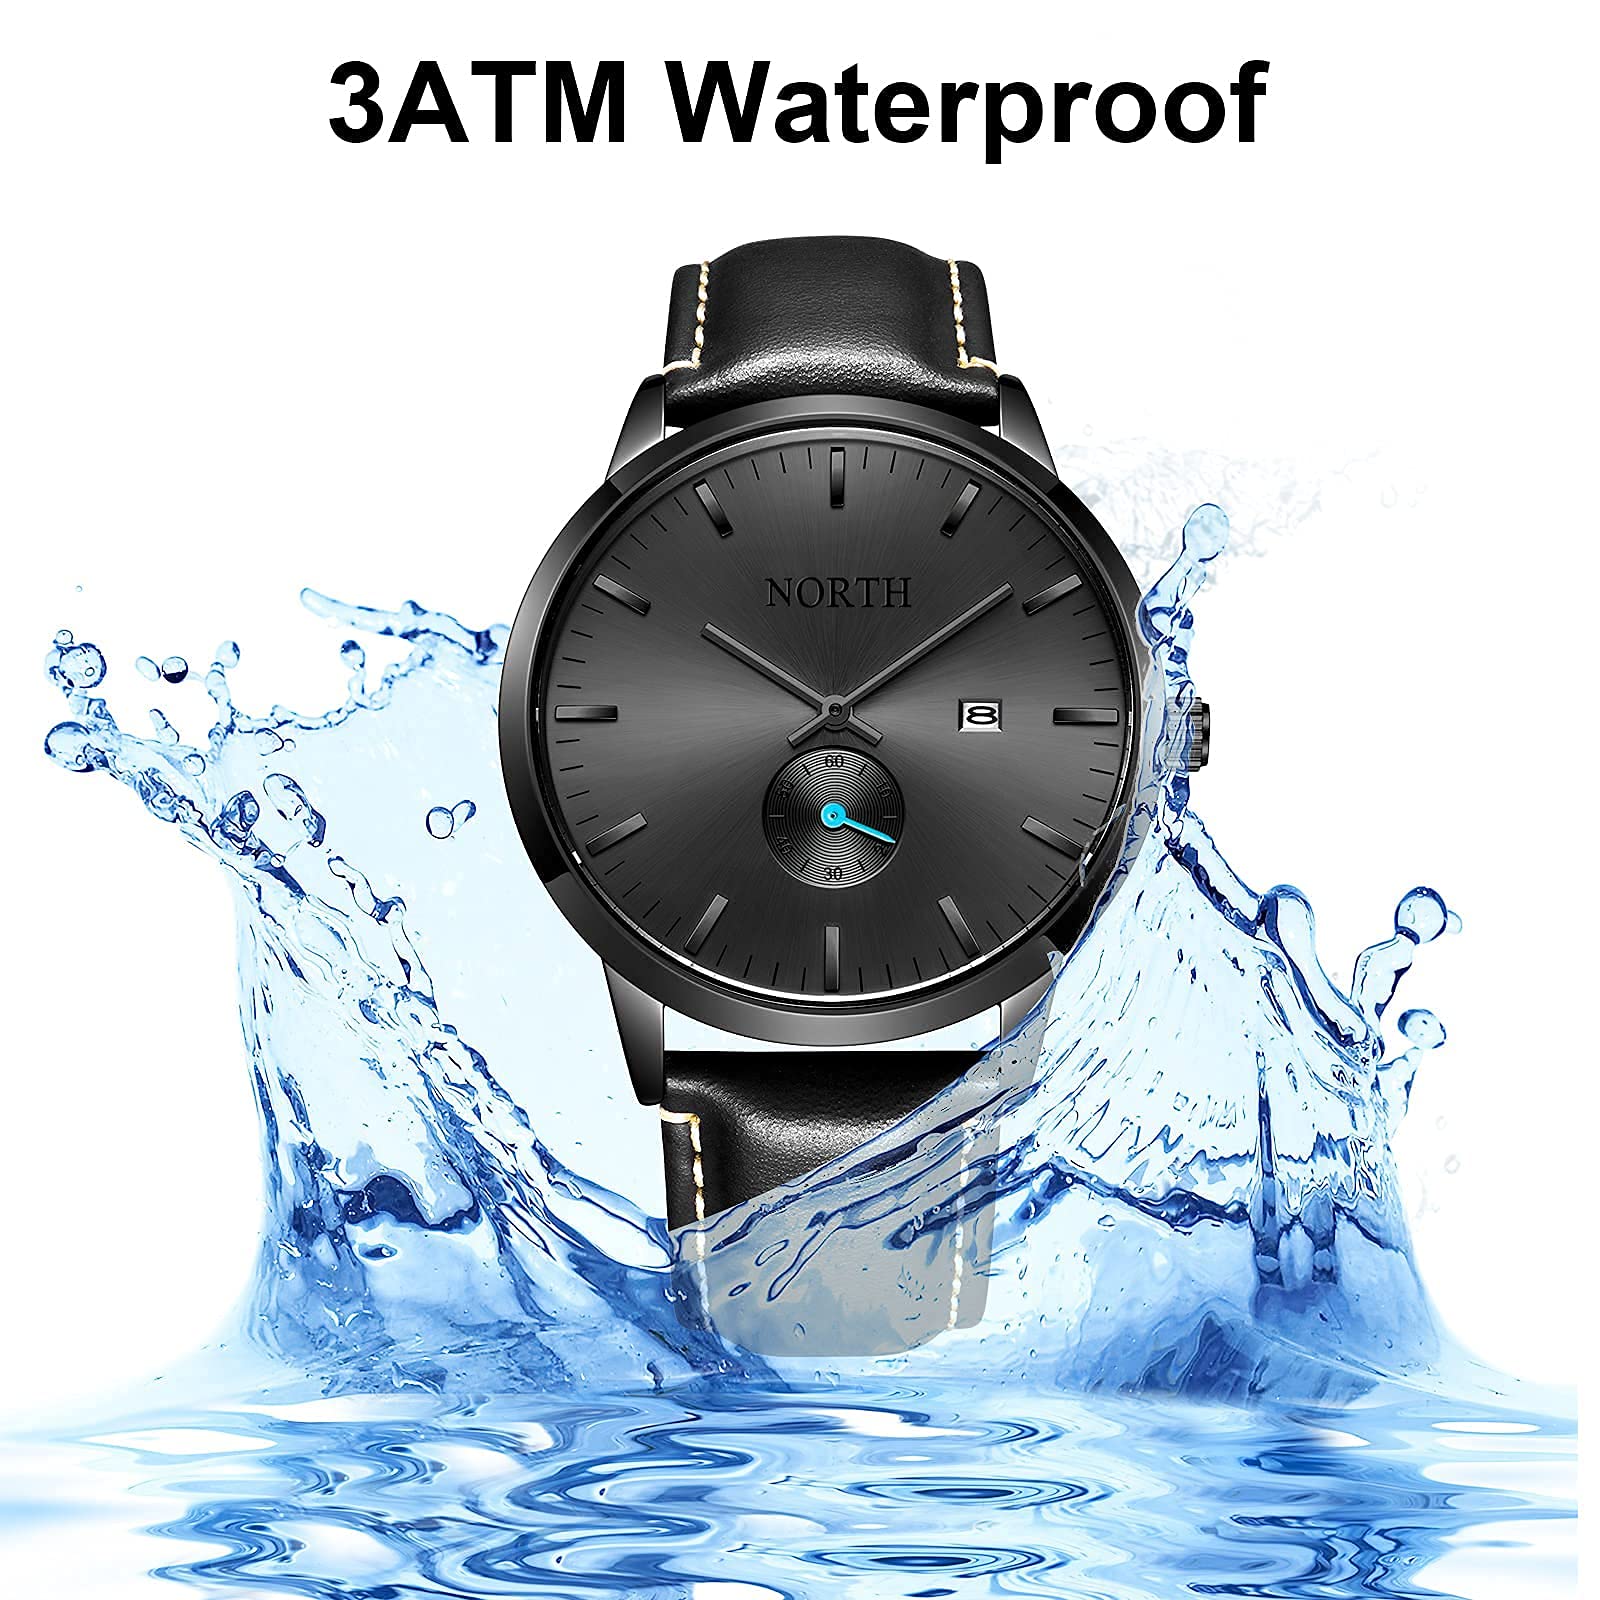 Black Waterproof Watch for Men,Analog Mens Watch with Day,Men's Wrist Watches Leather Band N6010